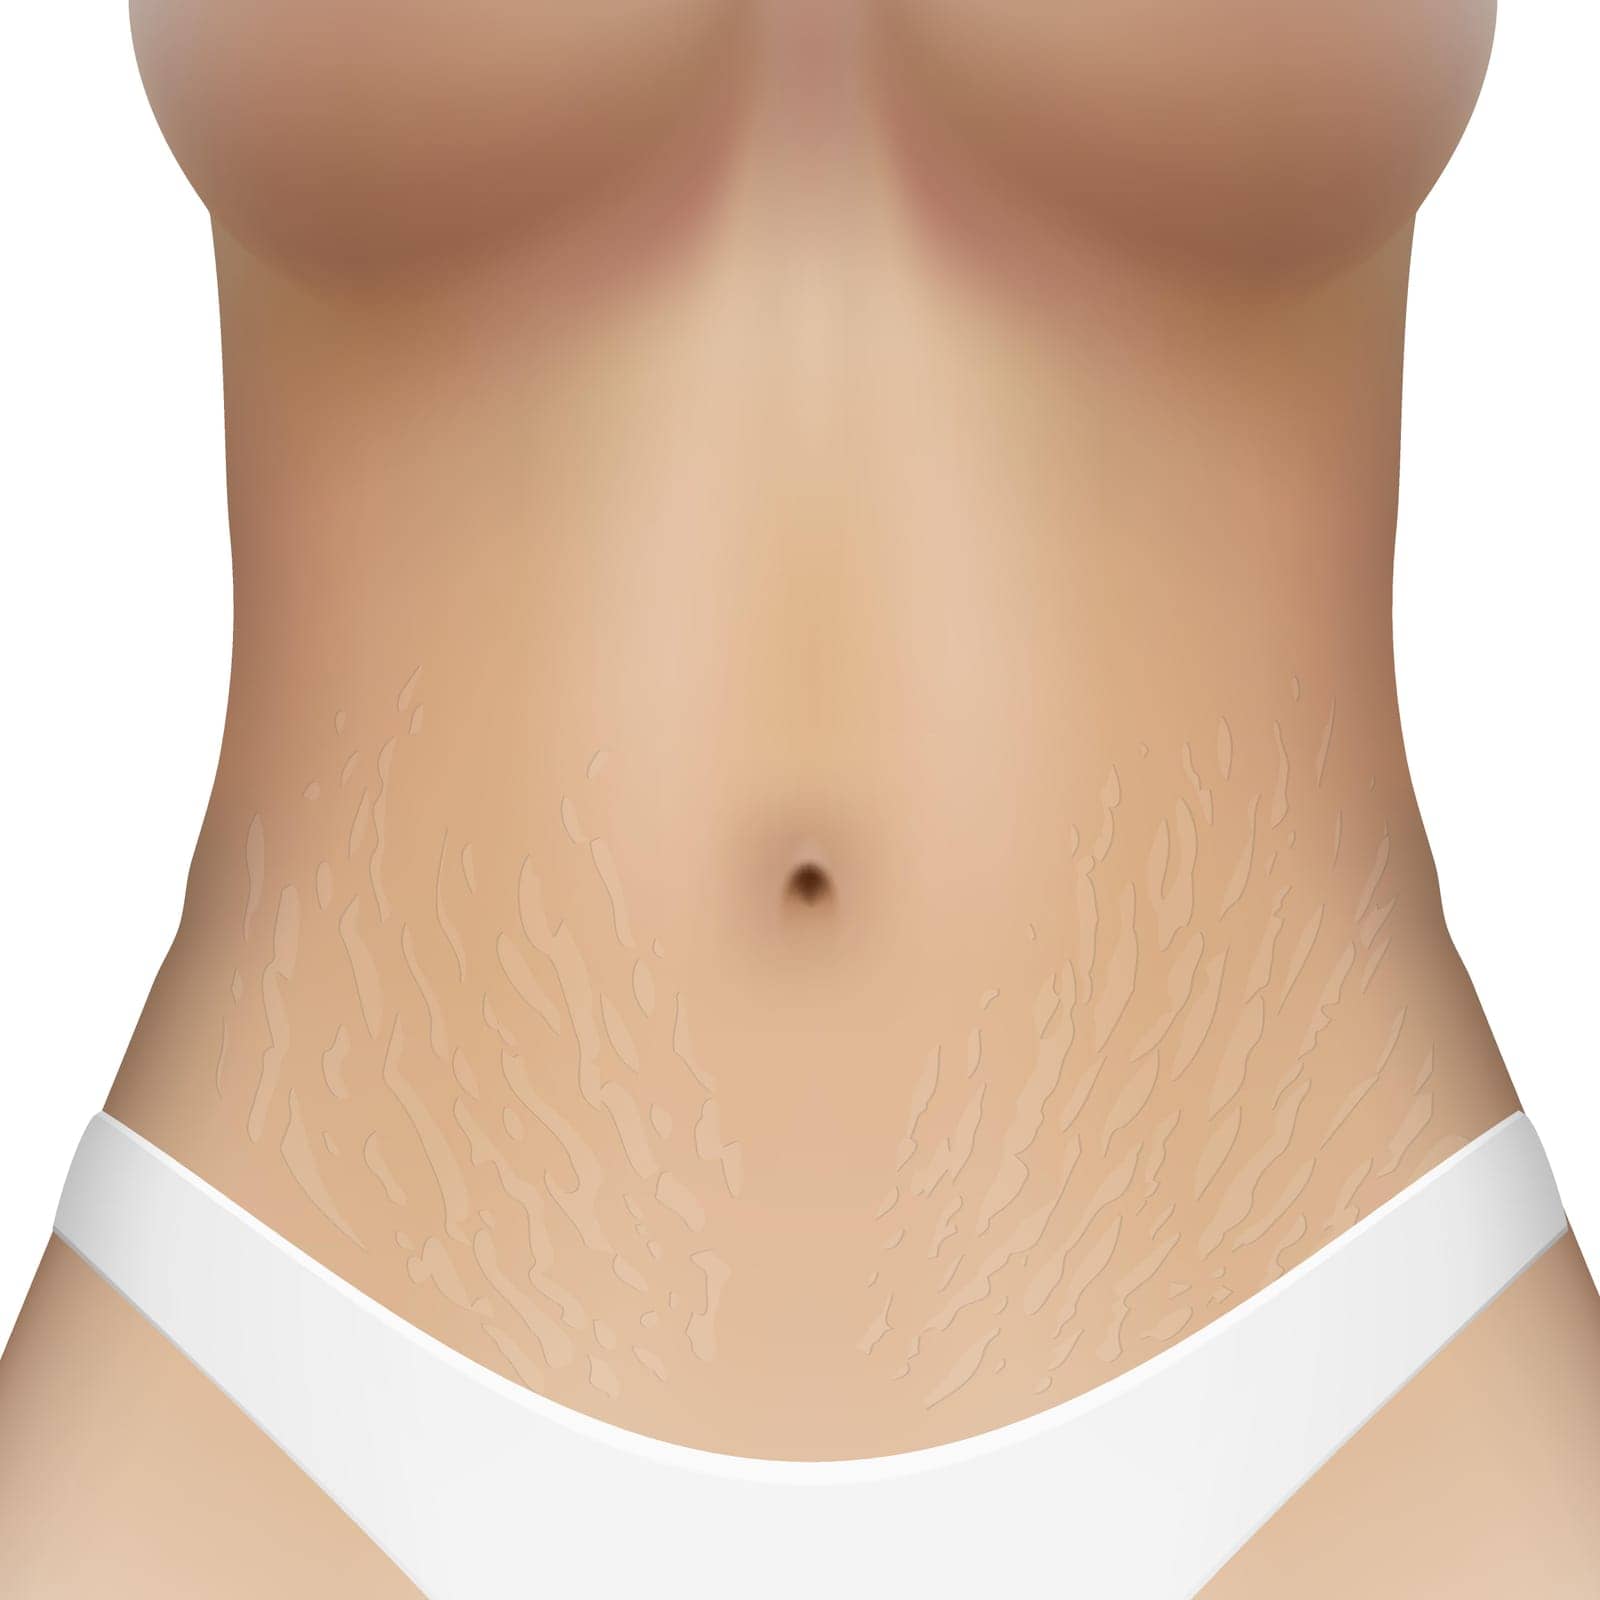 Realistic Woman Body Laser Strechmarks Removal Ad. EPS10 Vector